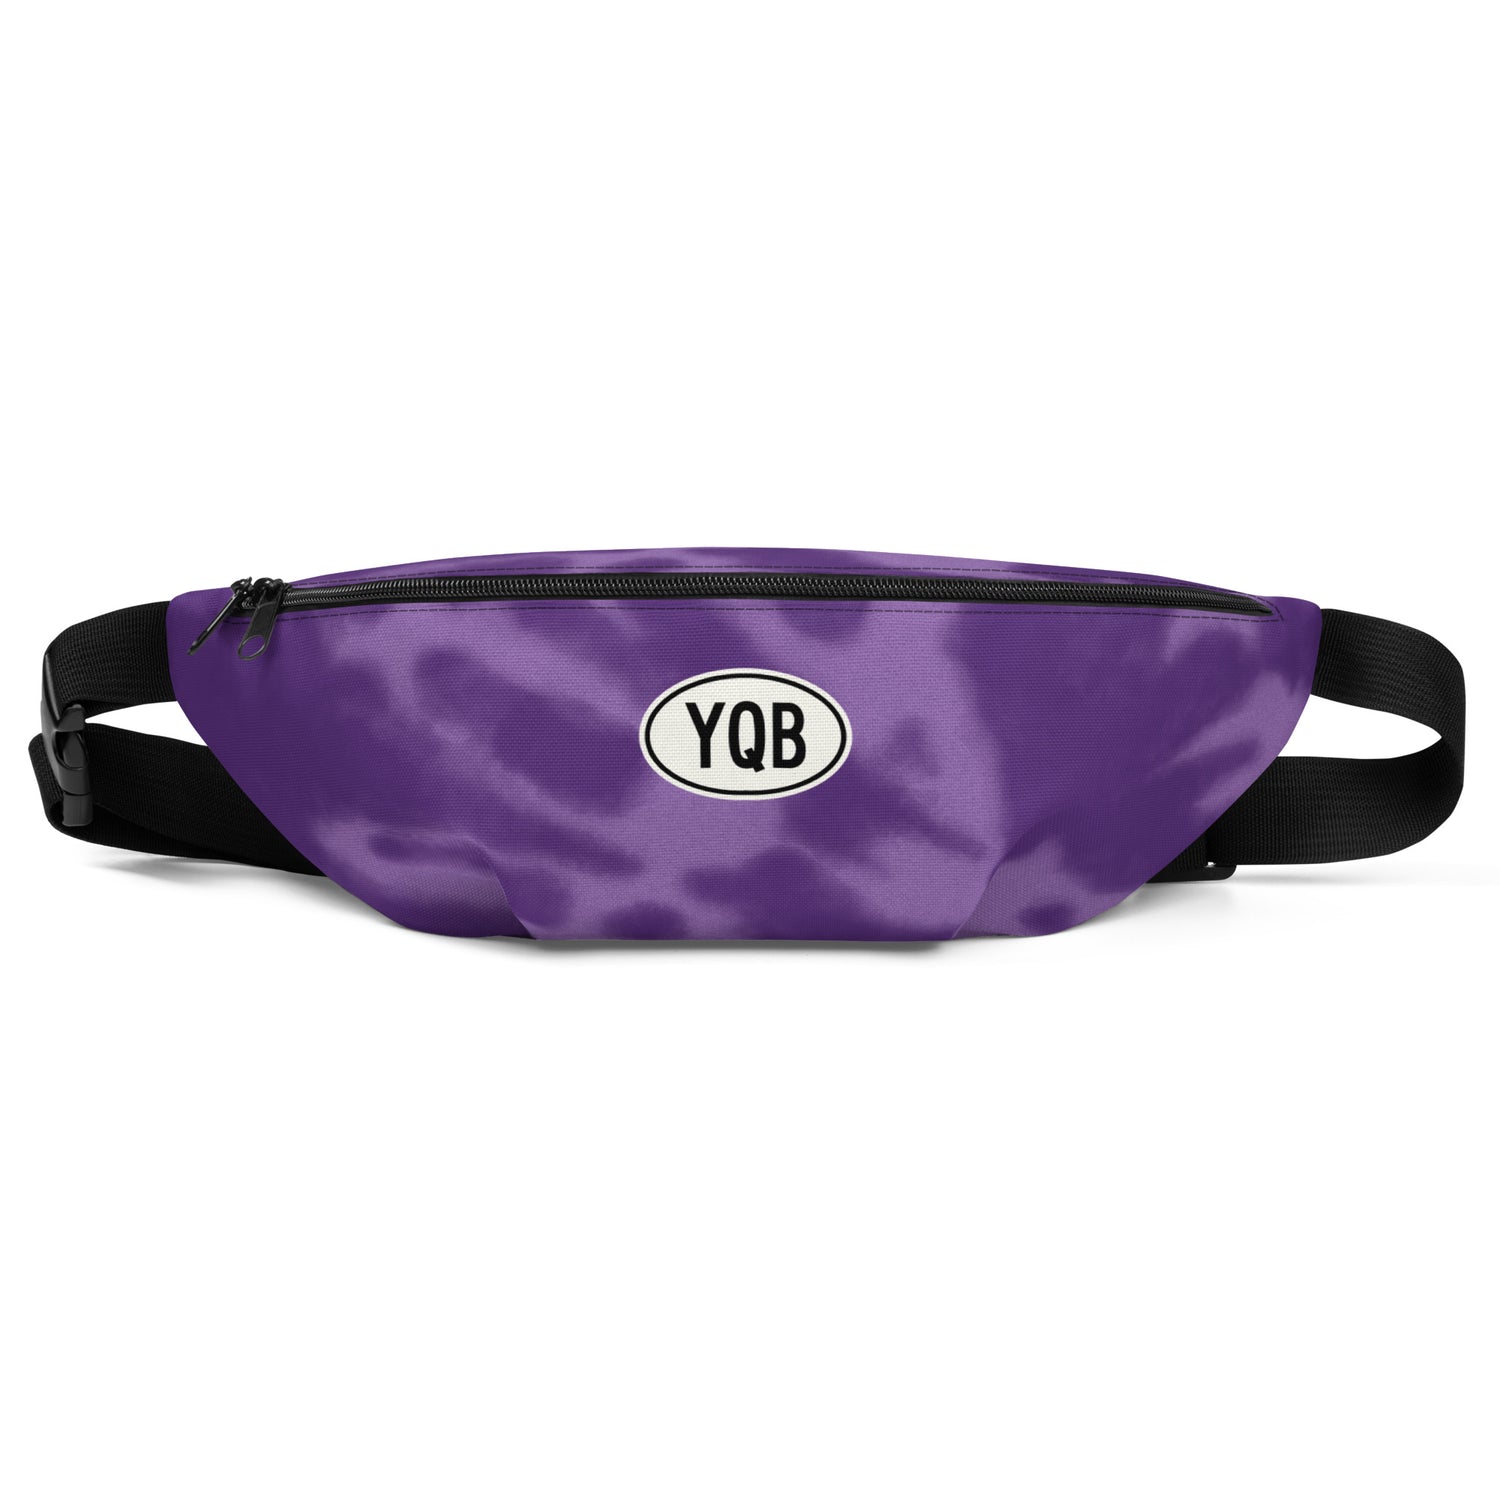 Quebec City Quebec Backpacks, Fanny Packs and Tote Bags • YQB Airport Code